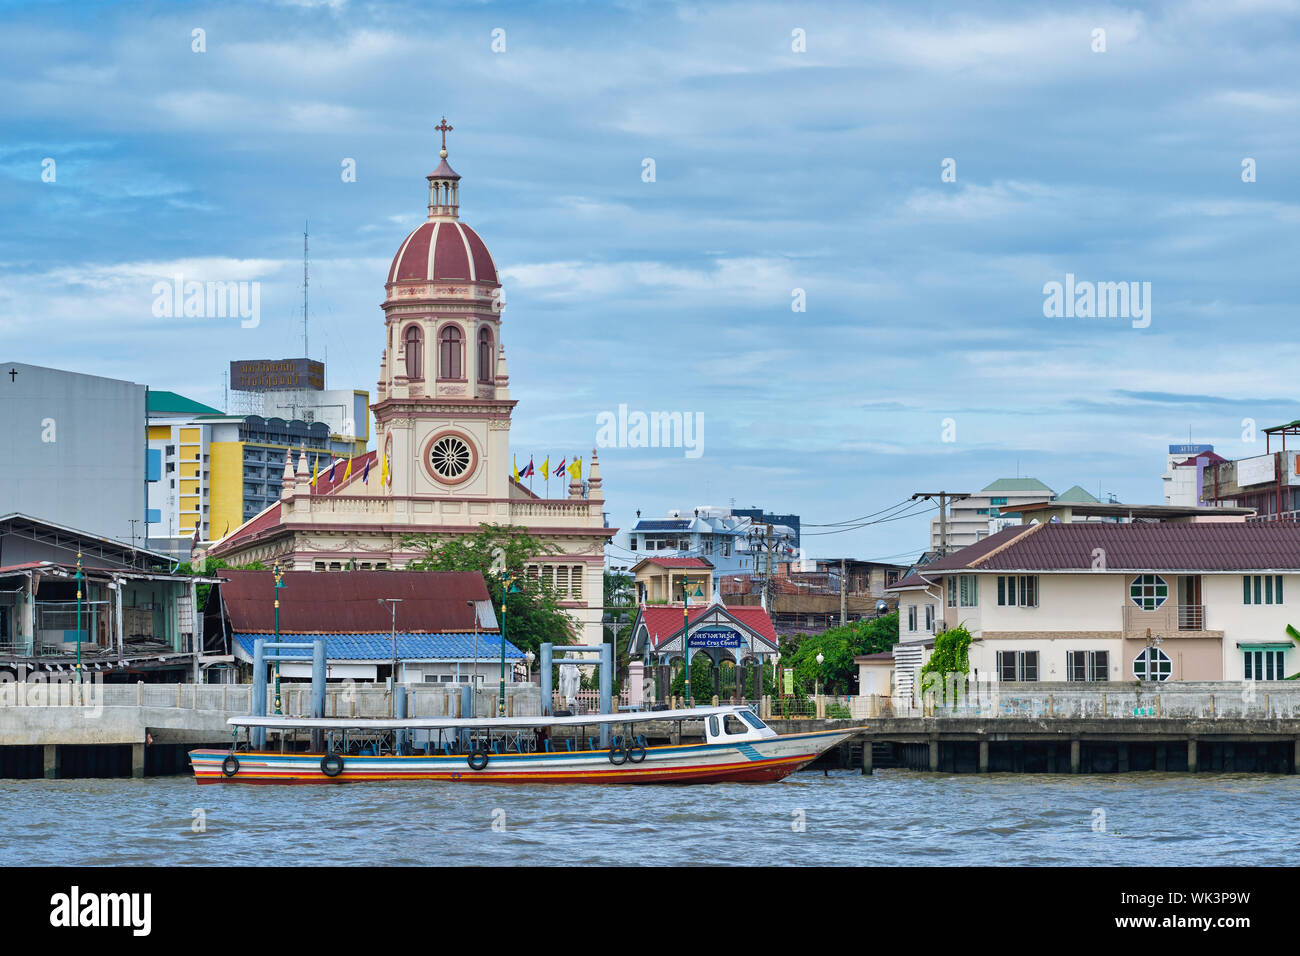 Portuguese-built Santa Cruz Church in Thonburi, Bangkok, Thailand, a river express boat in front; seen from the opposite bank of the Chao Phraya River Stock Photo